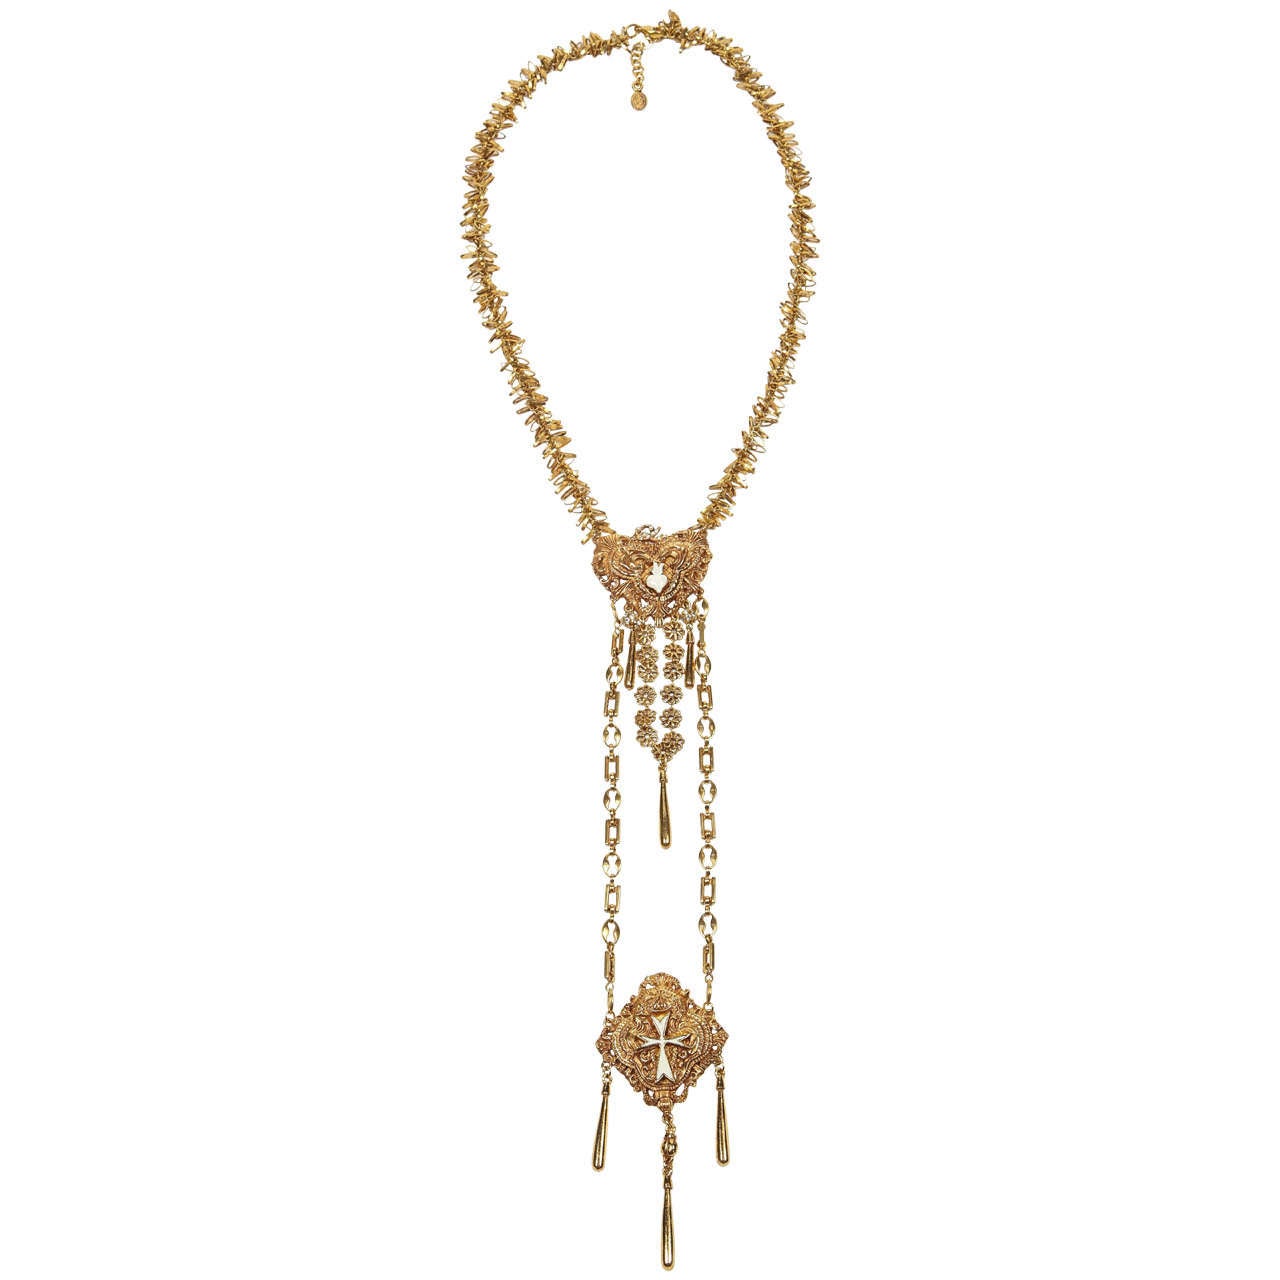 A striking double drop necklace by Christian Lacroix of gilt metal, enamel details in each pendant and rhinestone accents, including the CL at the top of the first pendant. Nicely detailed with various types of chain, including a fringed chain at